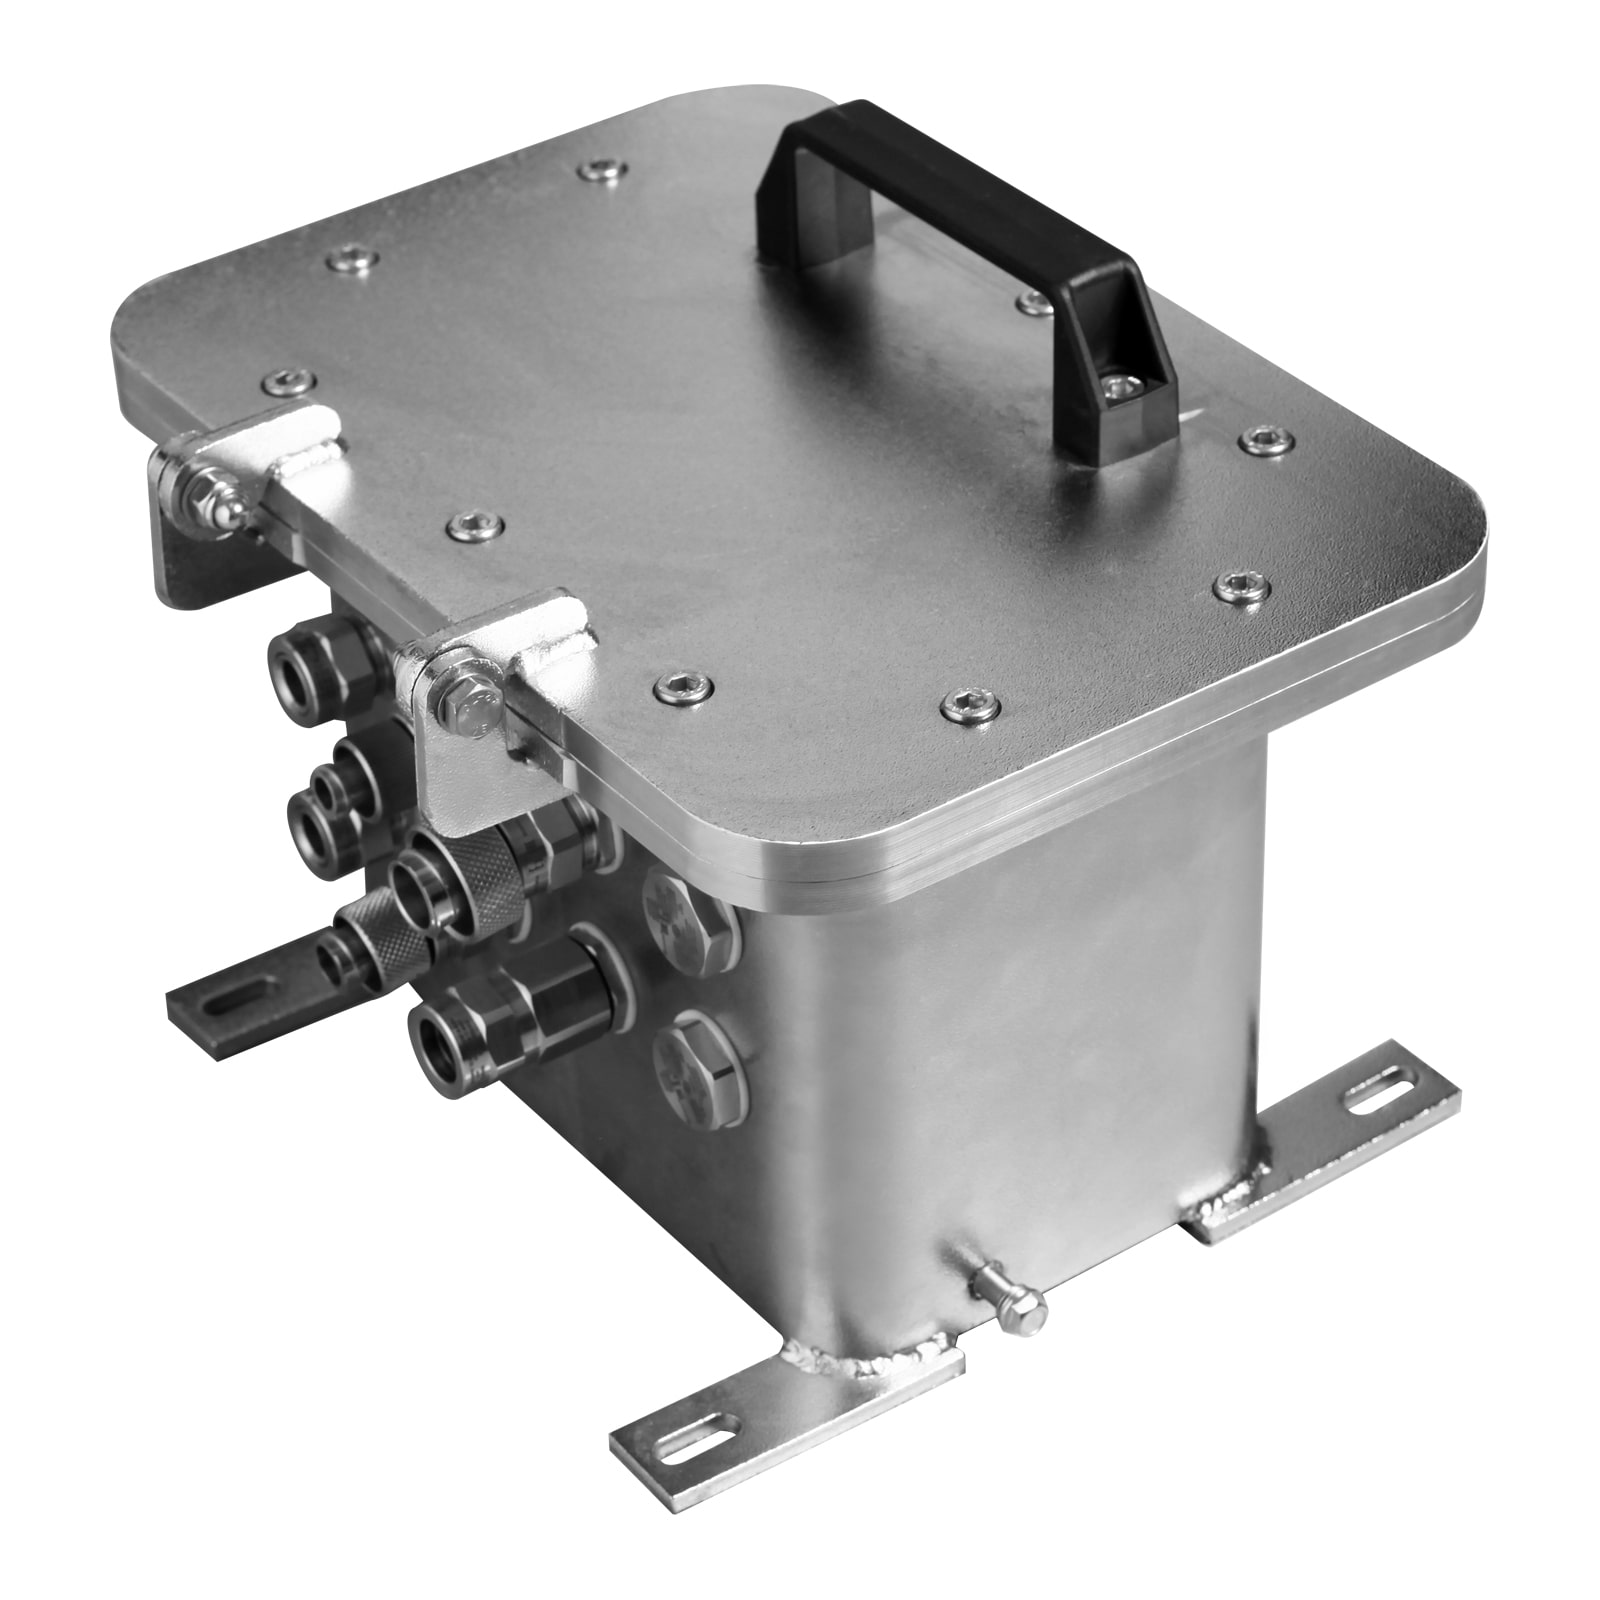 SHORV-NT type explosion-proof stainless steel boxes (flameproof enclosures)